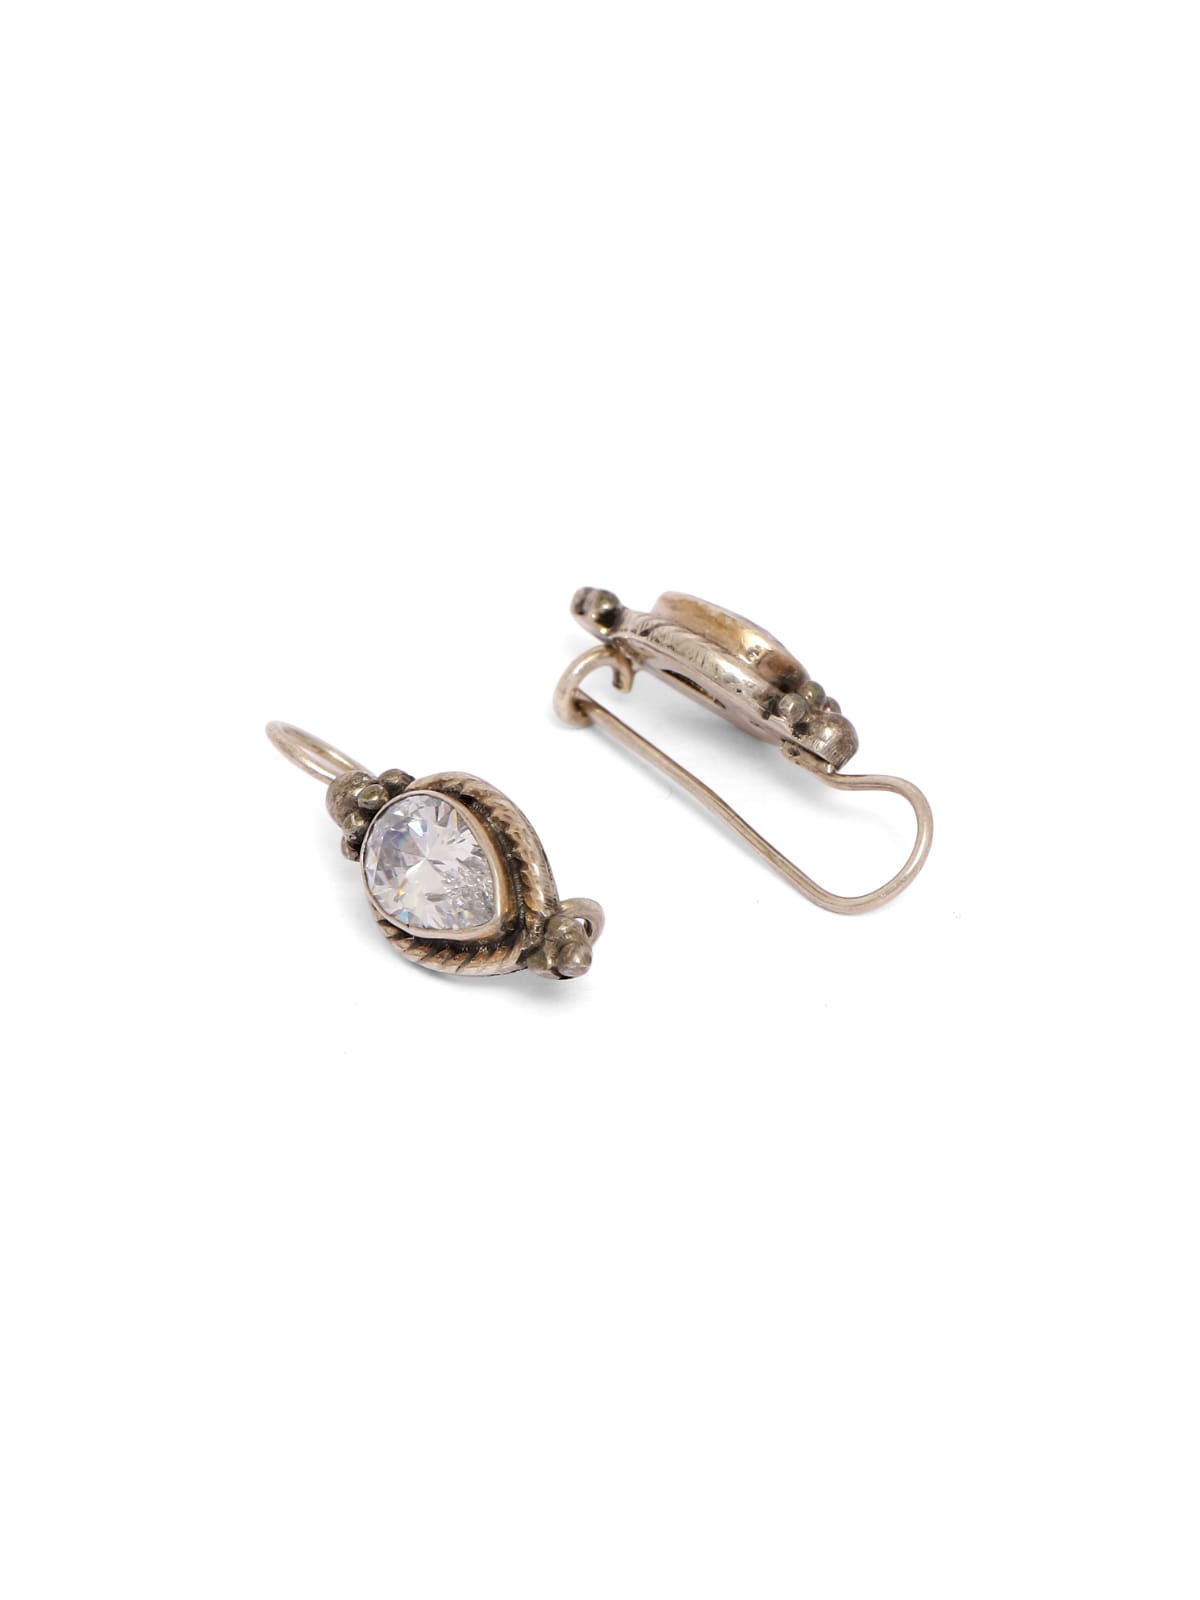 92.5 sterling Silver Zircon with twisted wire setting hook closure earrings.